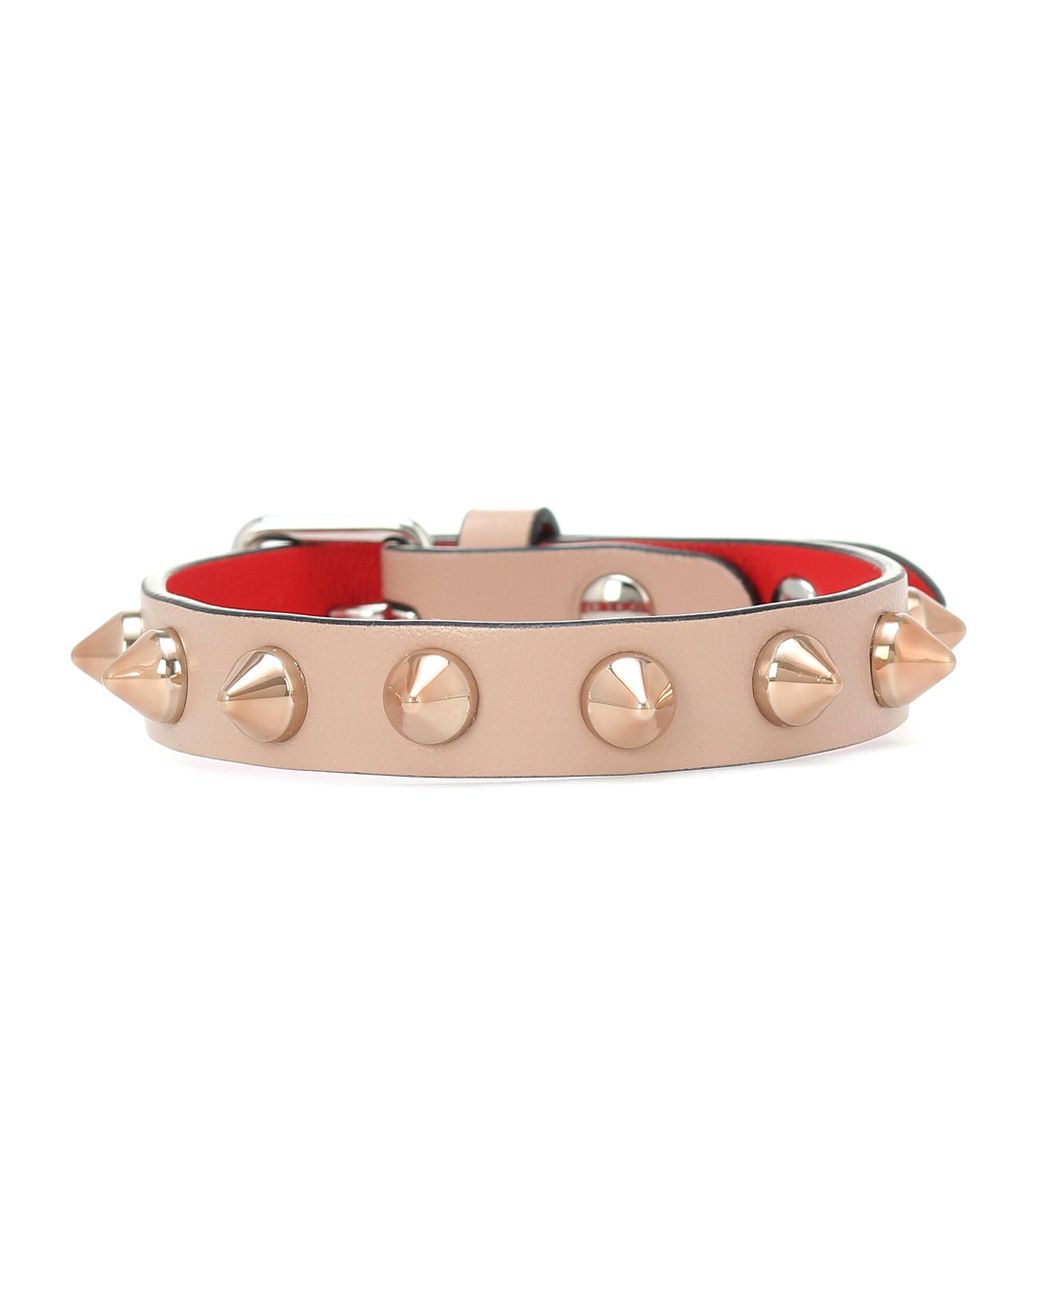 Christian Louboutin Loubilink Studded Leather Bracelet in Beige (Natural) - Lyst